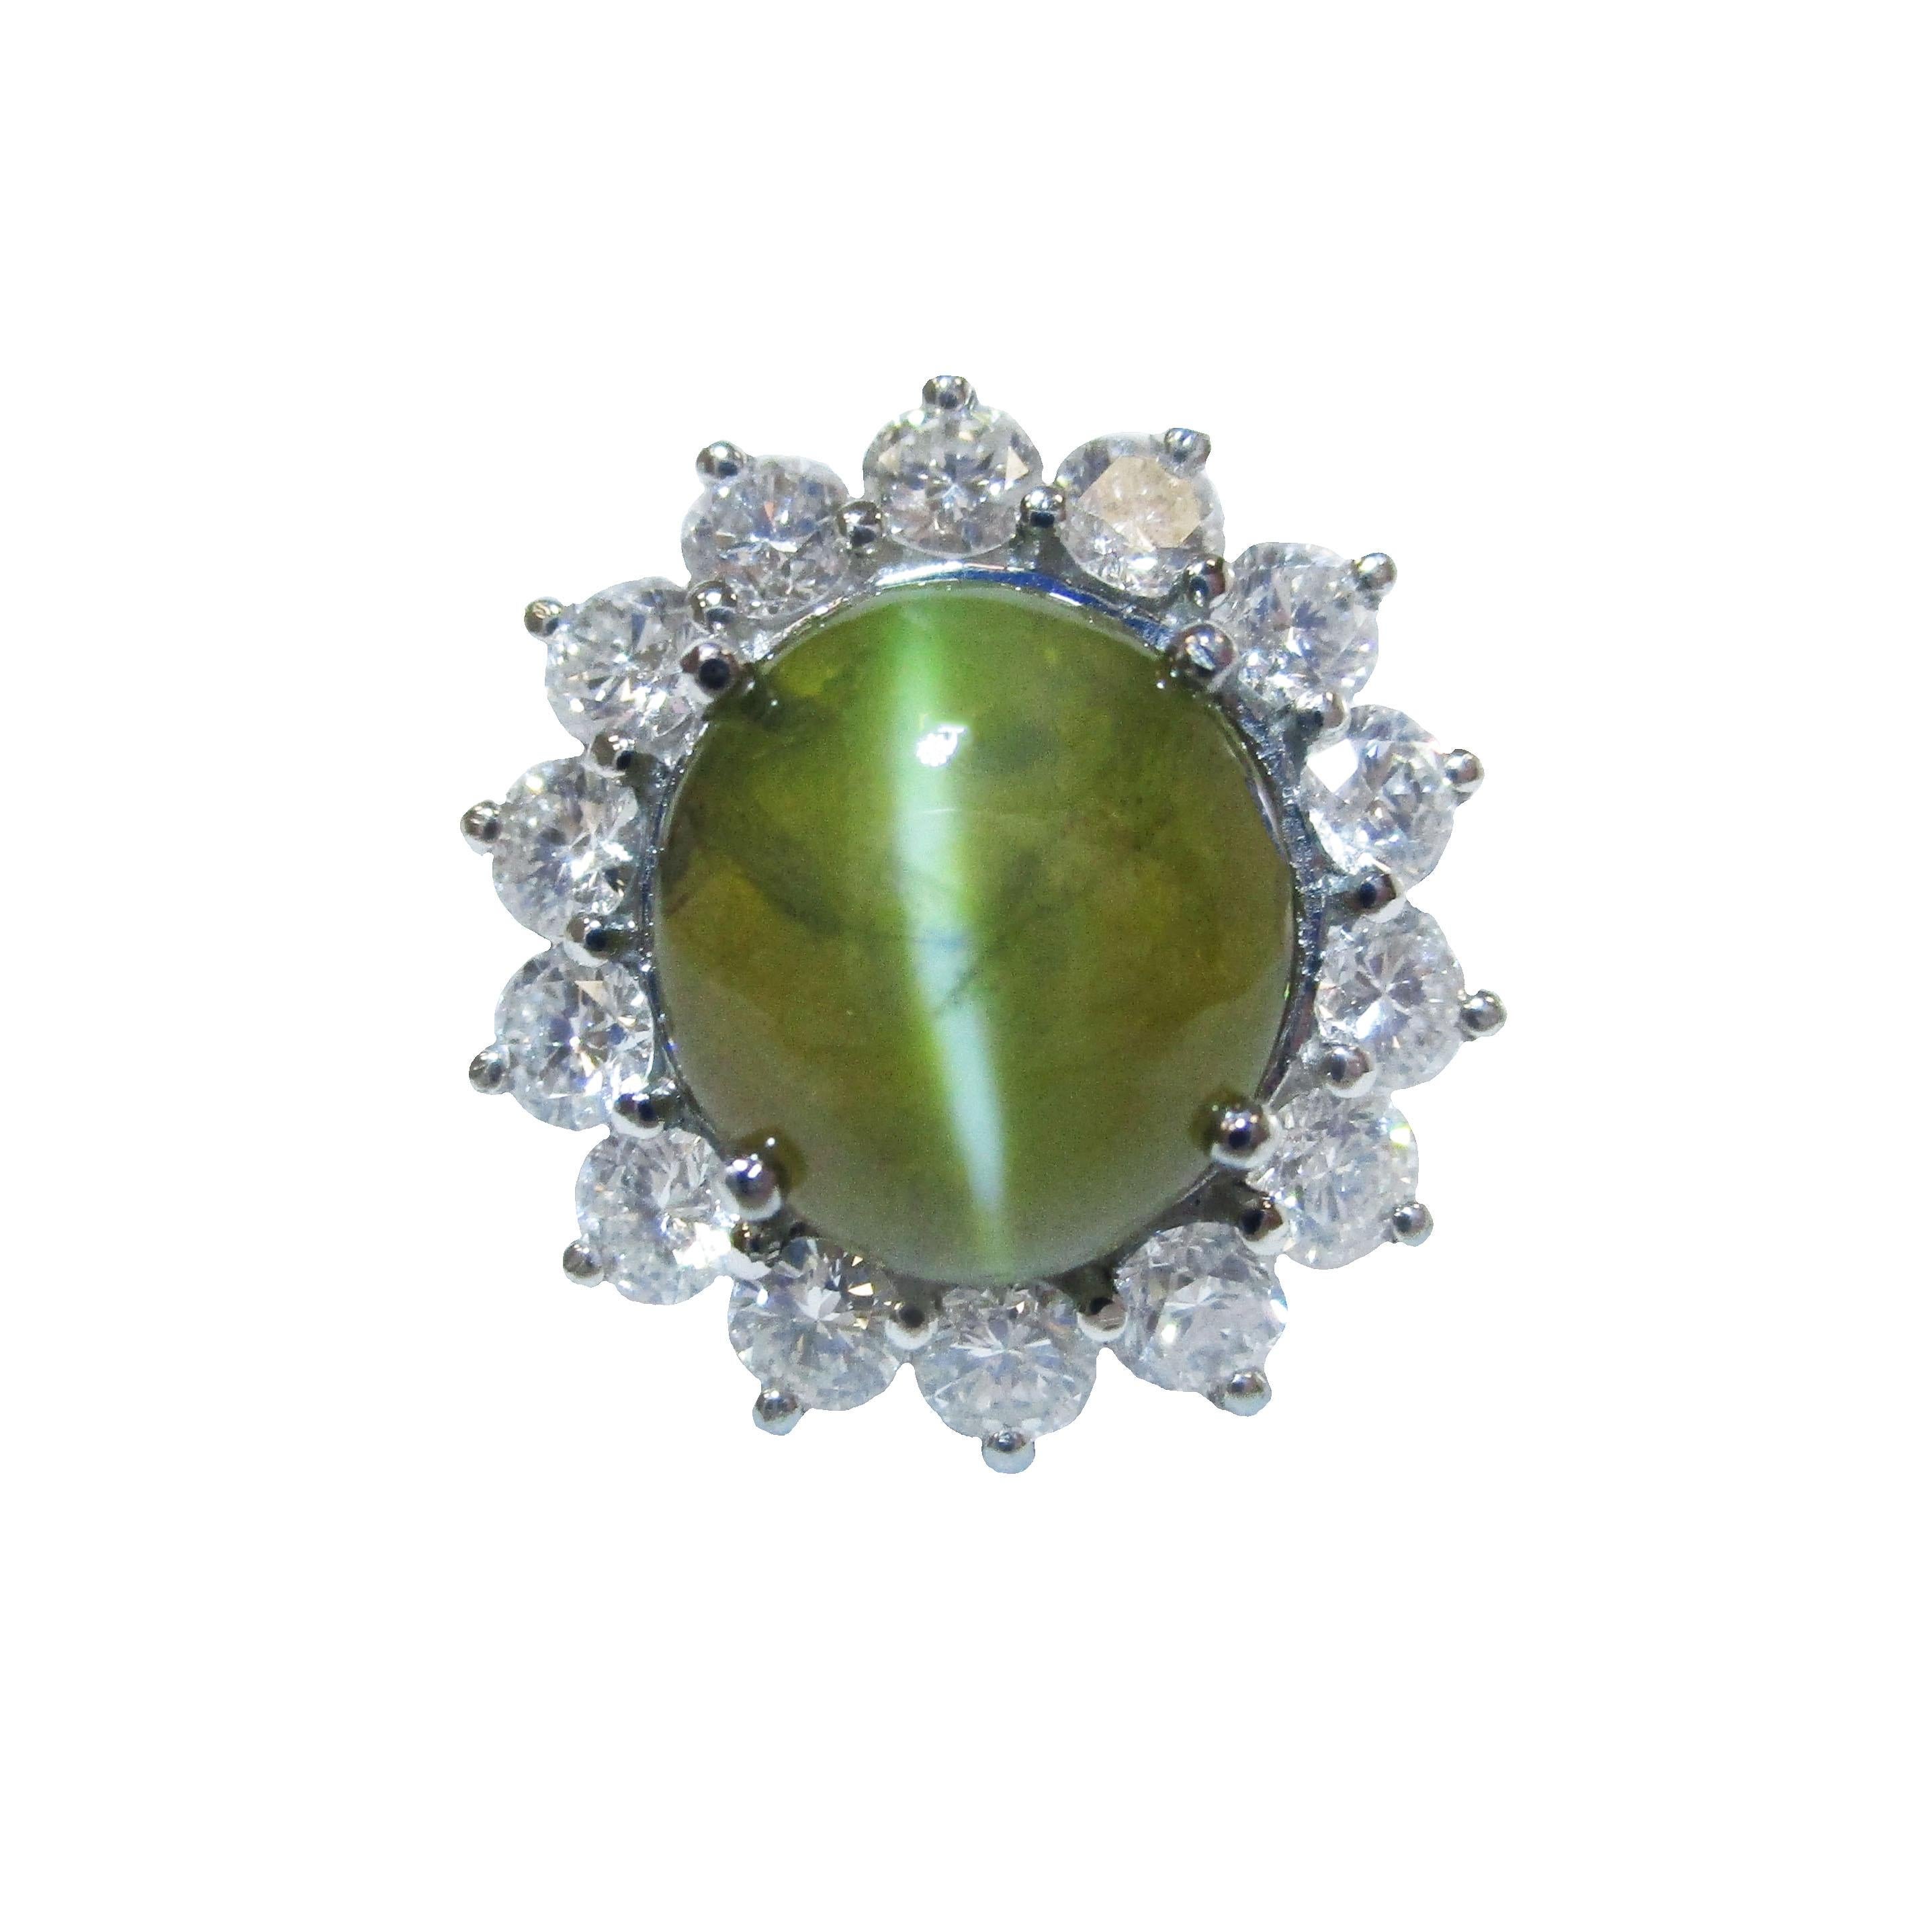 This gorgeous platinum ring features a stunning 7+ carat cat's eye chrysoberyl that carries a GIA report and is surrounded by brilliant white diamonds. The cat's eye chrysoberyl has rich brown honey colored undertones that seems to glow in the